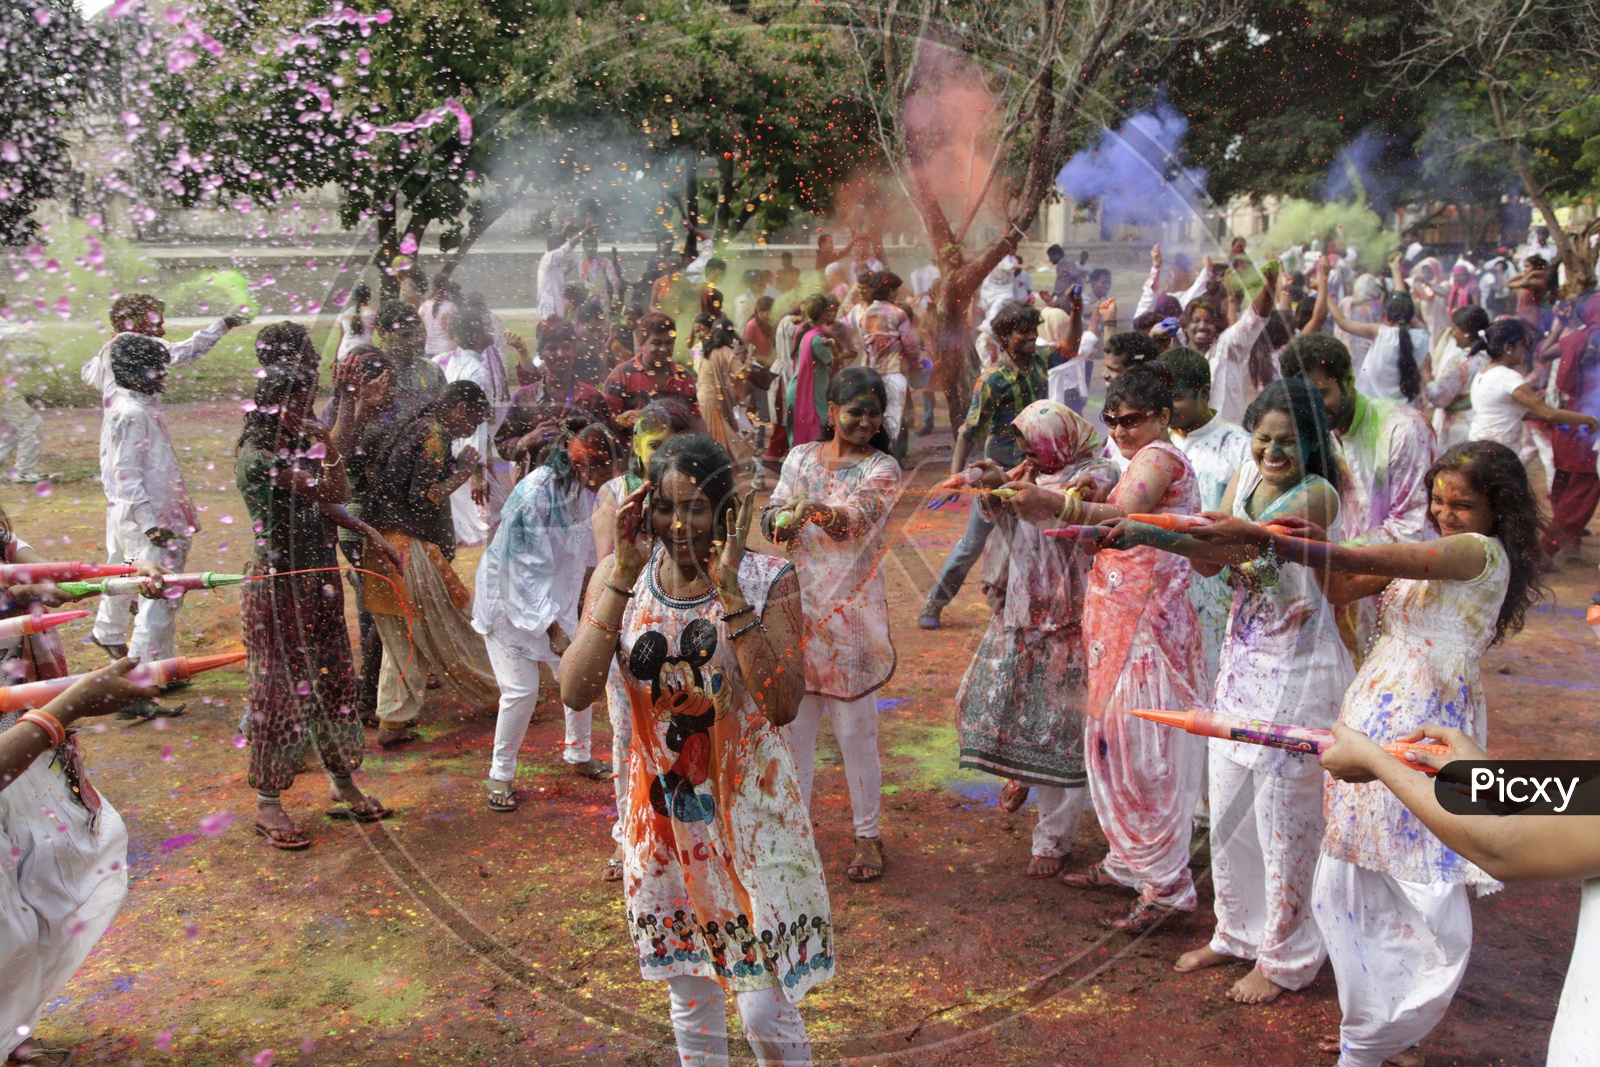 People celebrating holi festival / People throwing colors to each other during the Holi celebration in Hyderabad/ Indian Festival